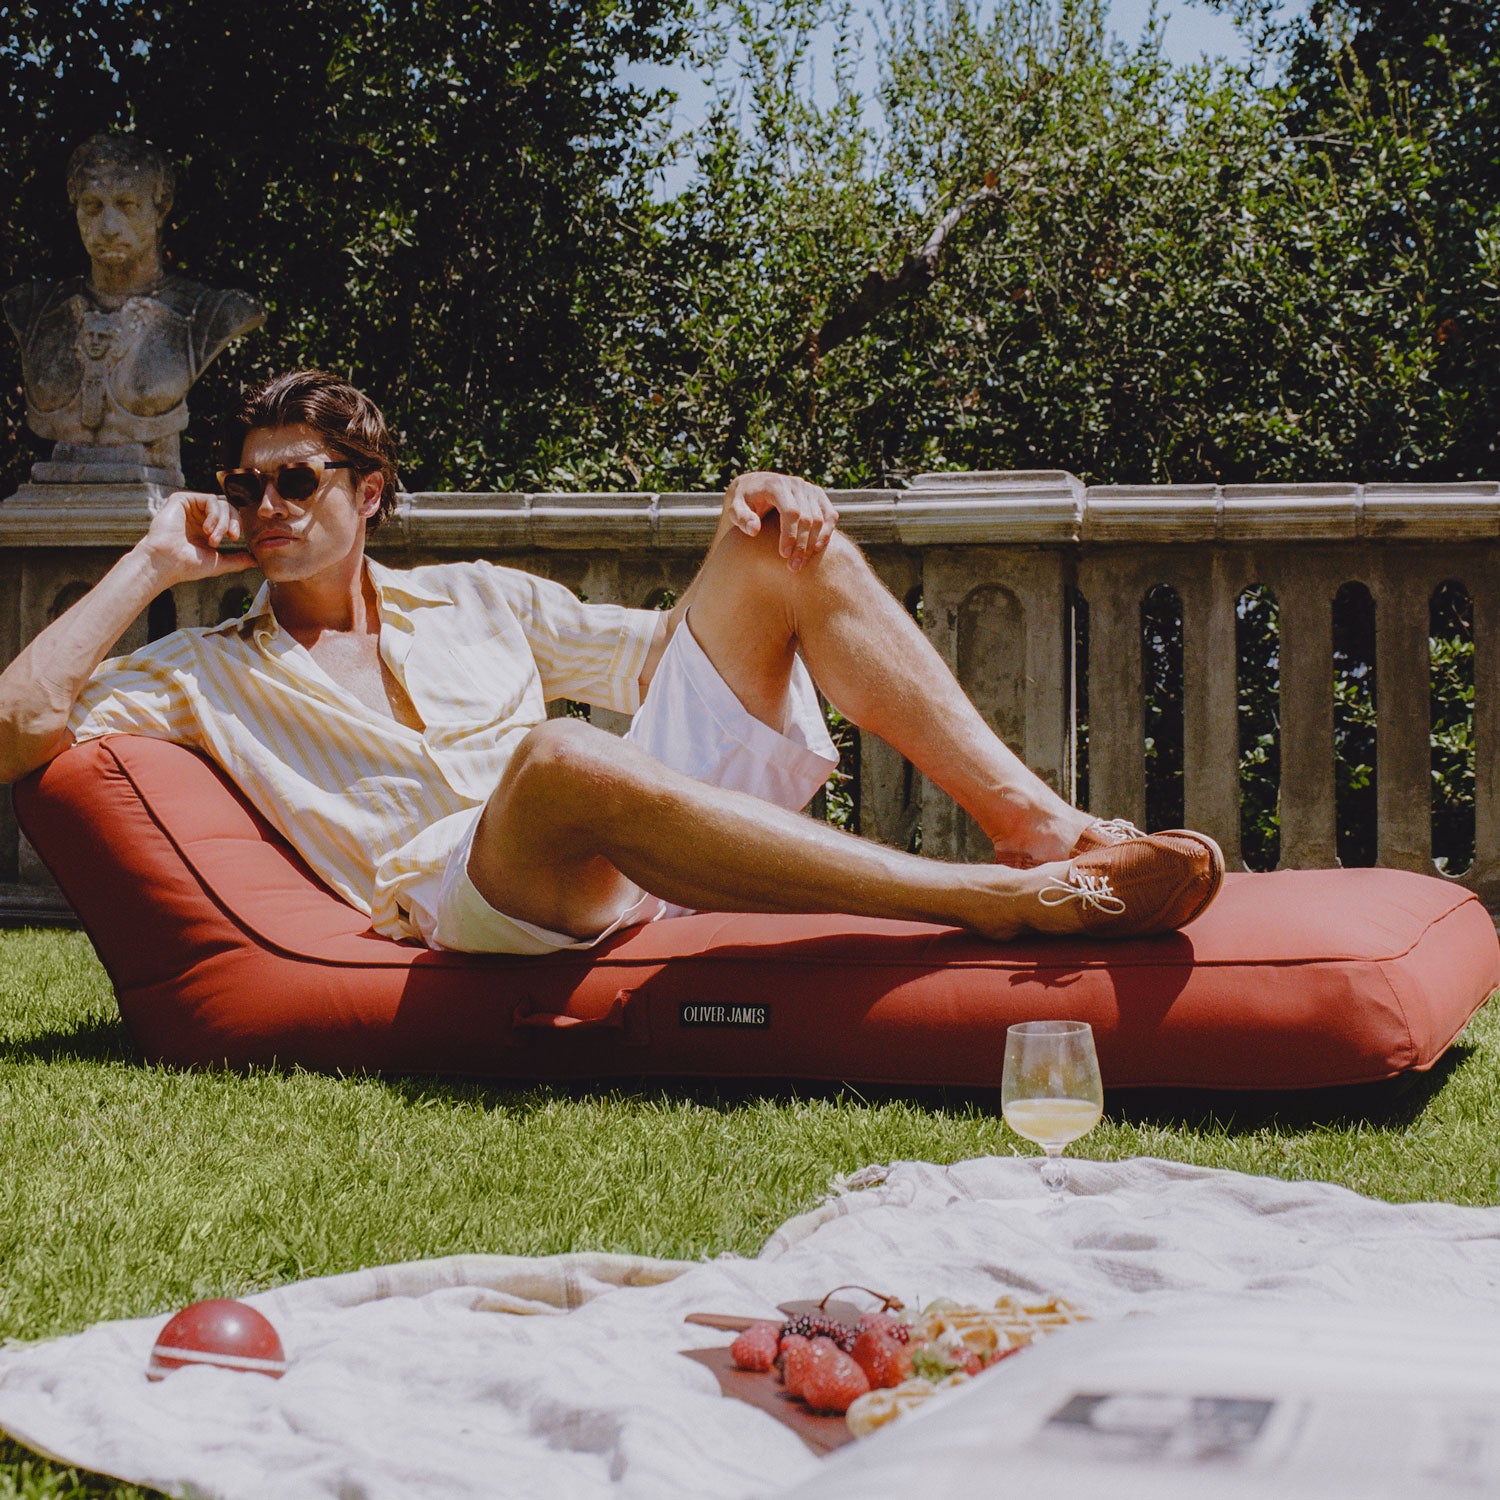 A man in sunglasses laying on a terracotta colored luxury pool float on a grass with a picnic.